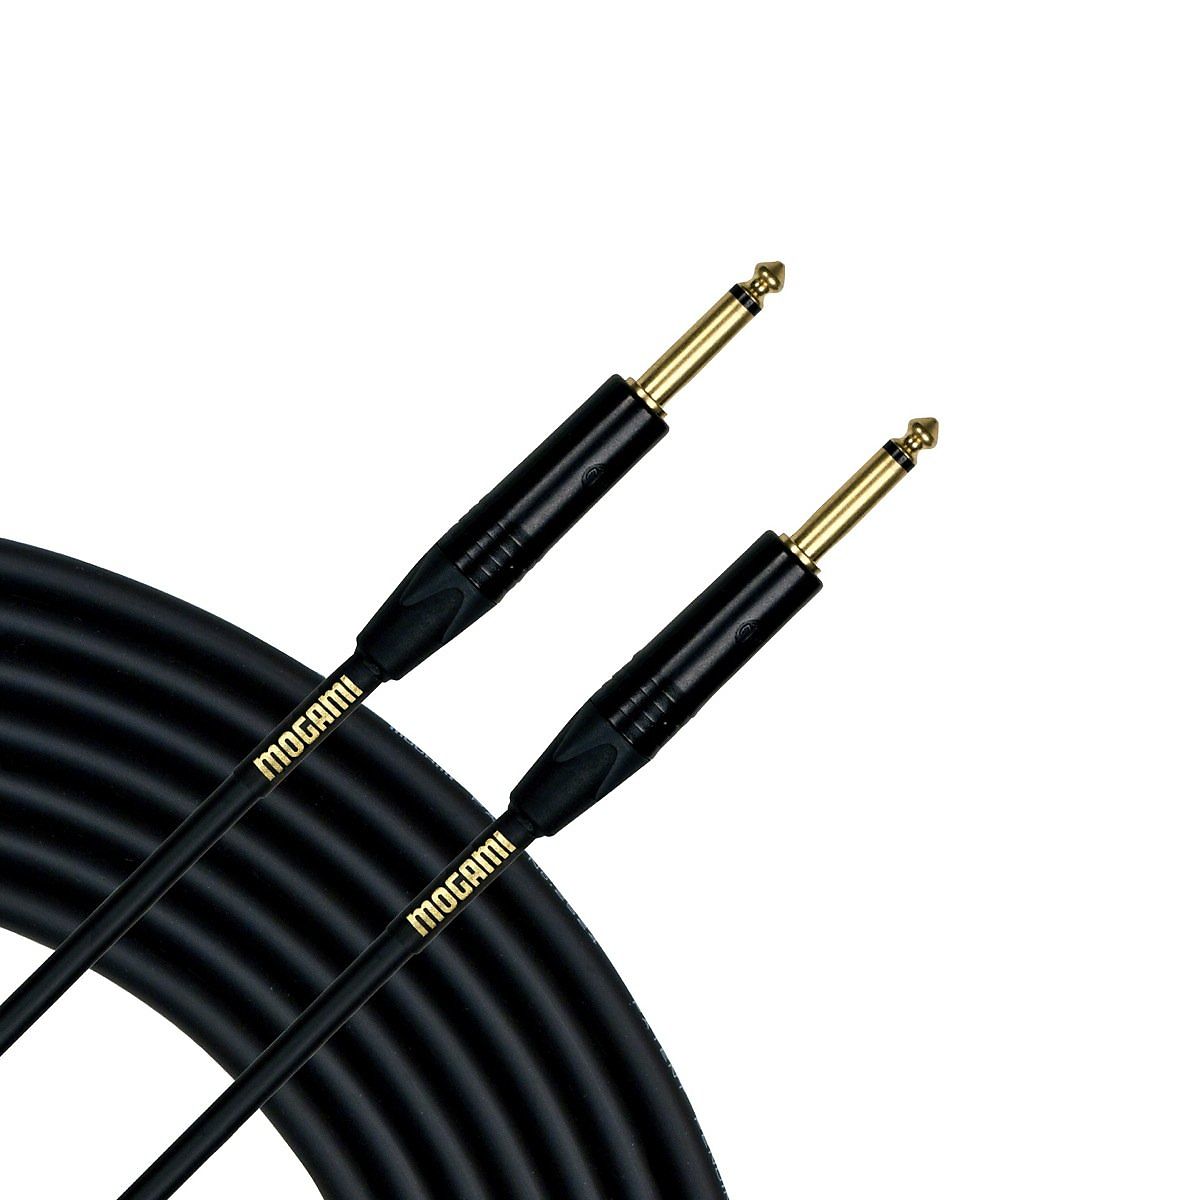 Mogami Gold Guitar/Instrument Cable, 6 Foot